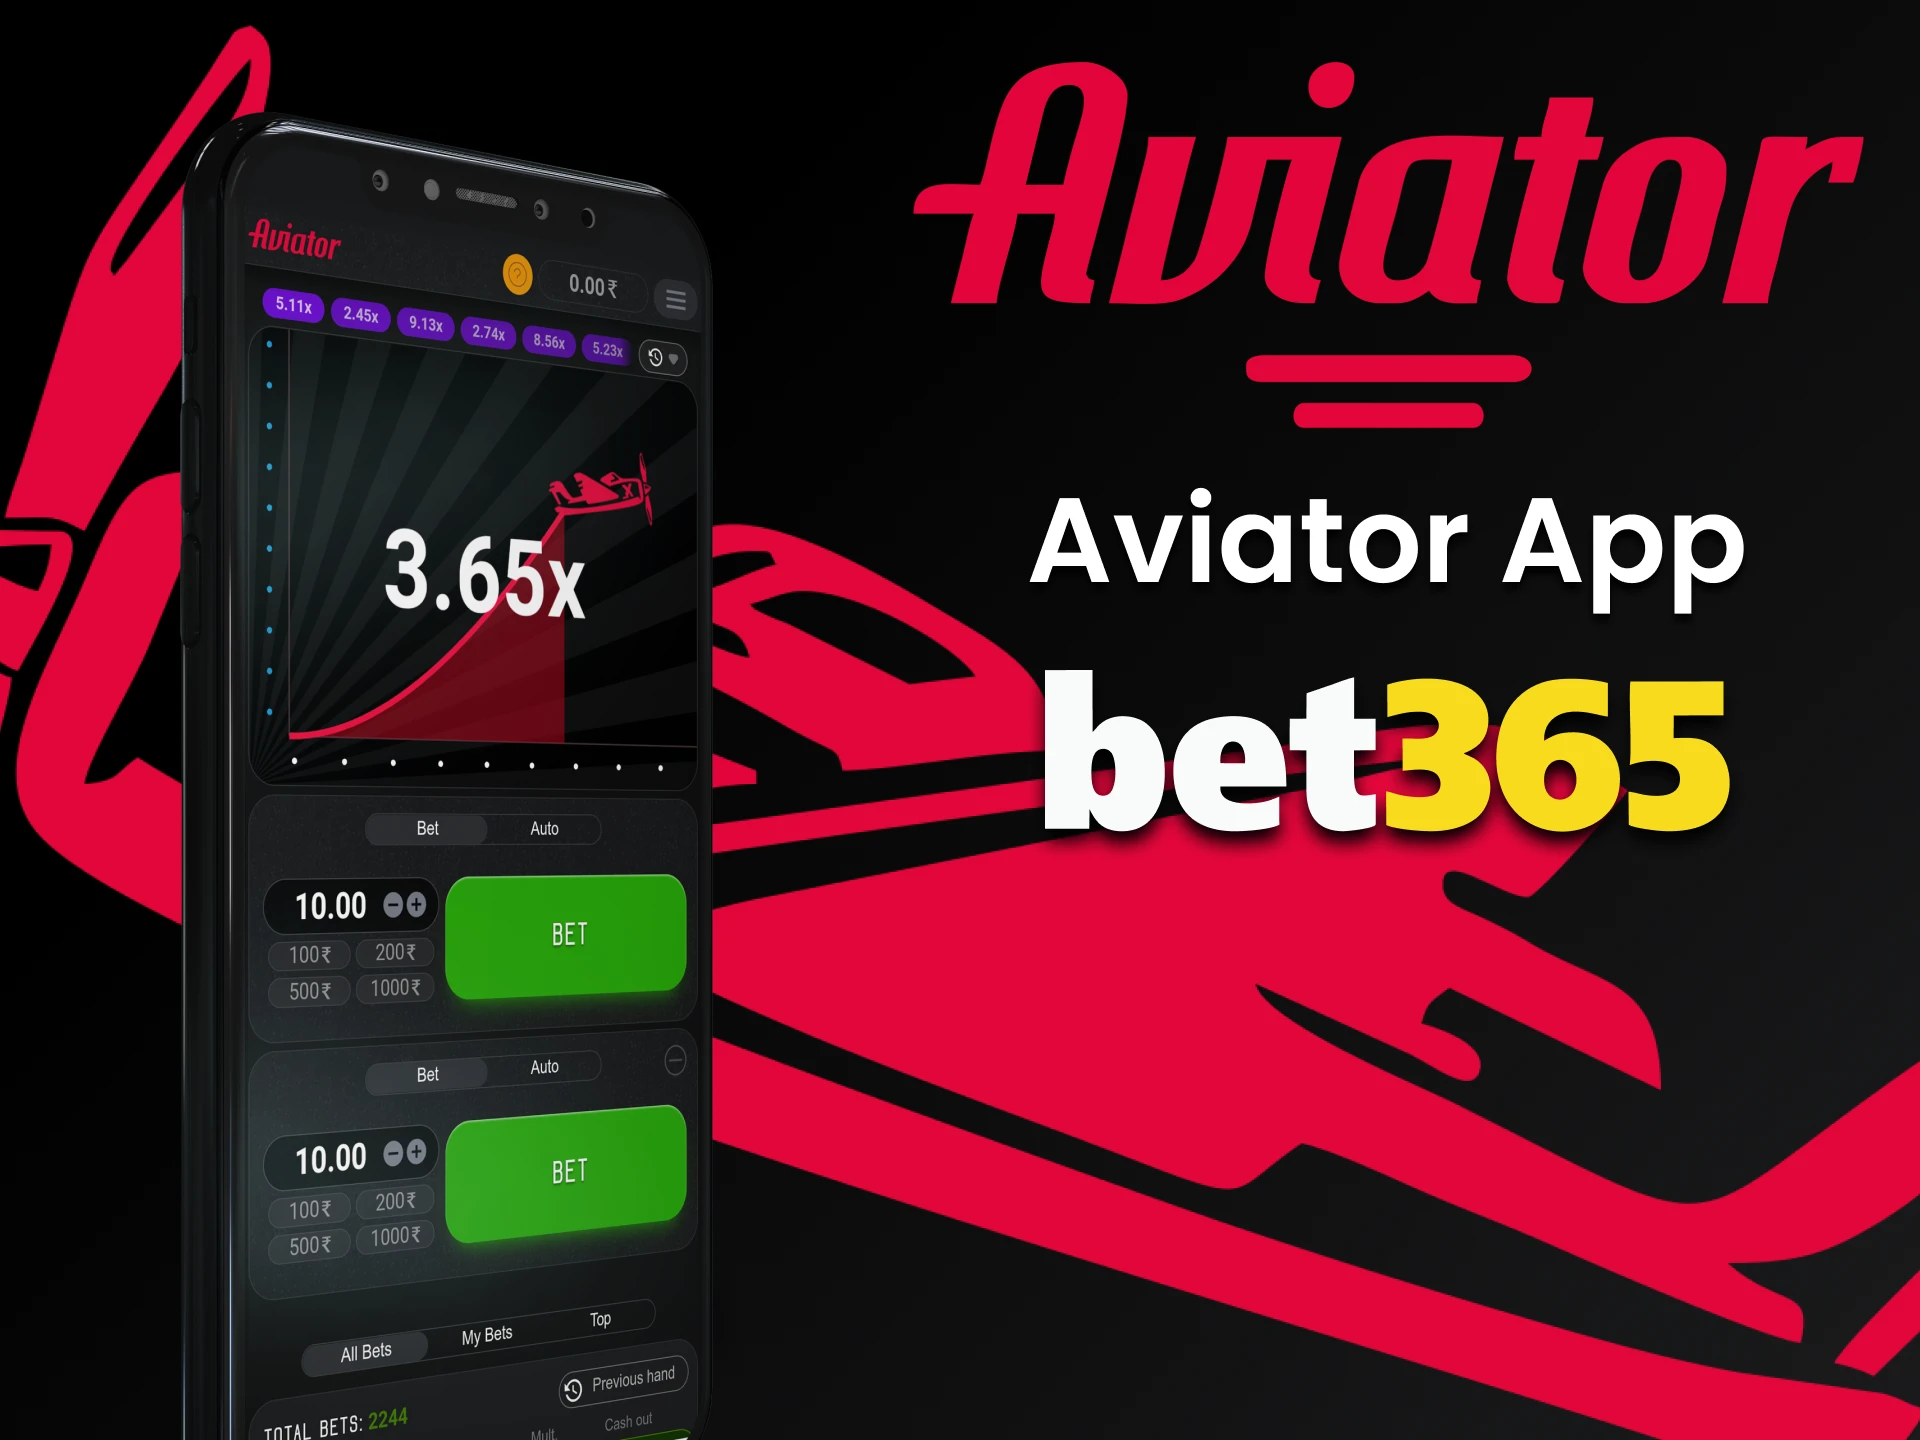 Play the Aviator game with the Bet365 app.